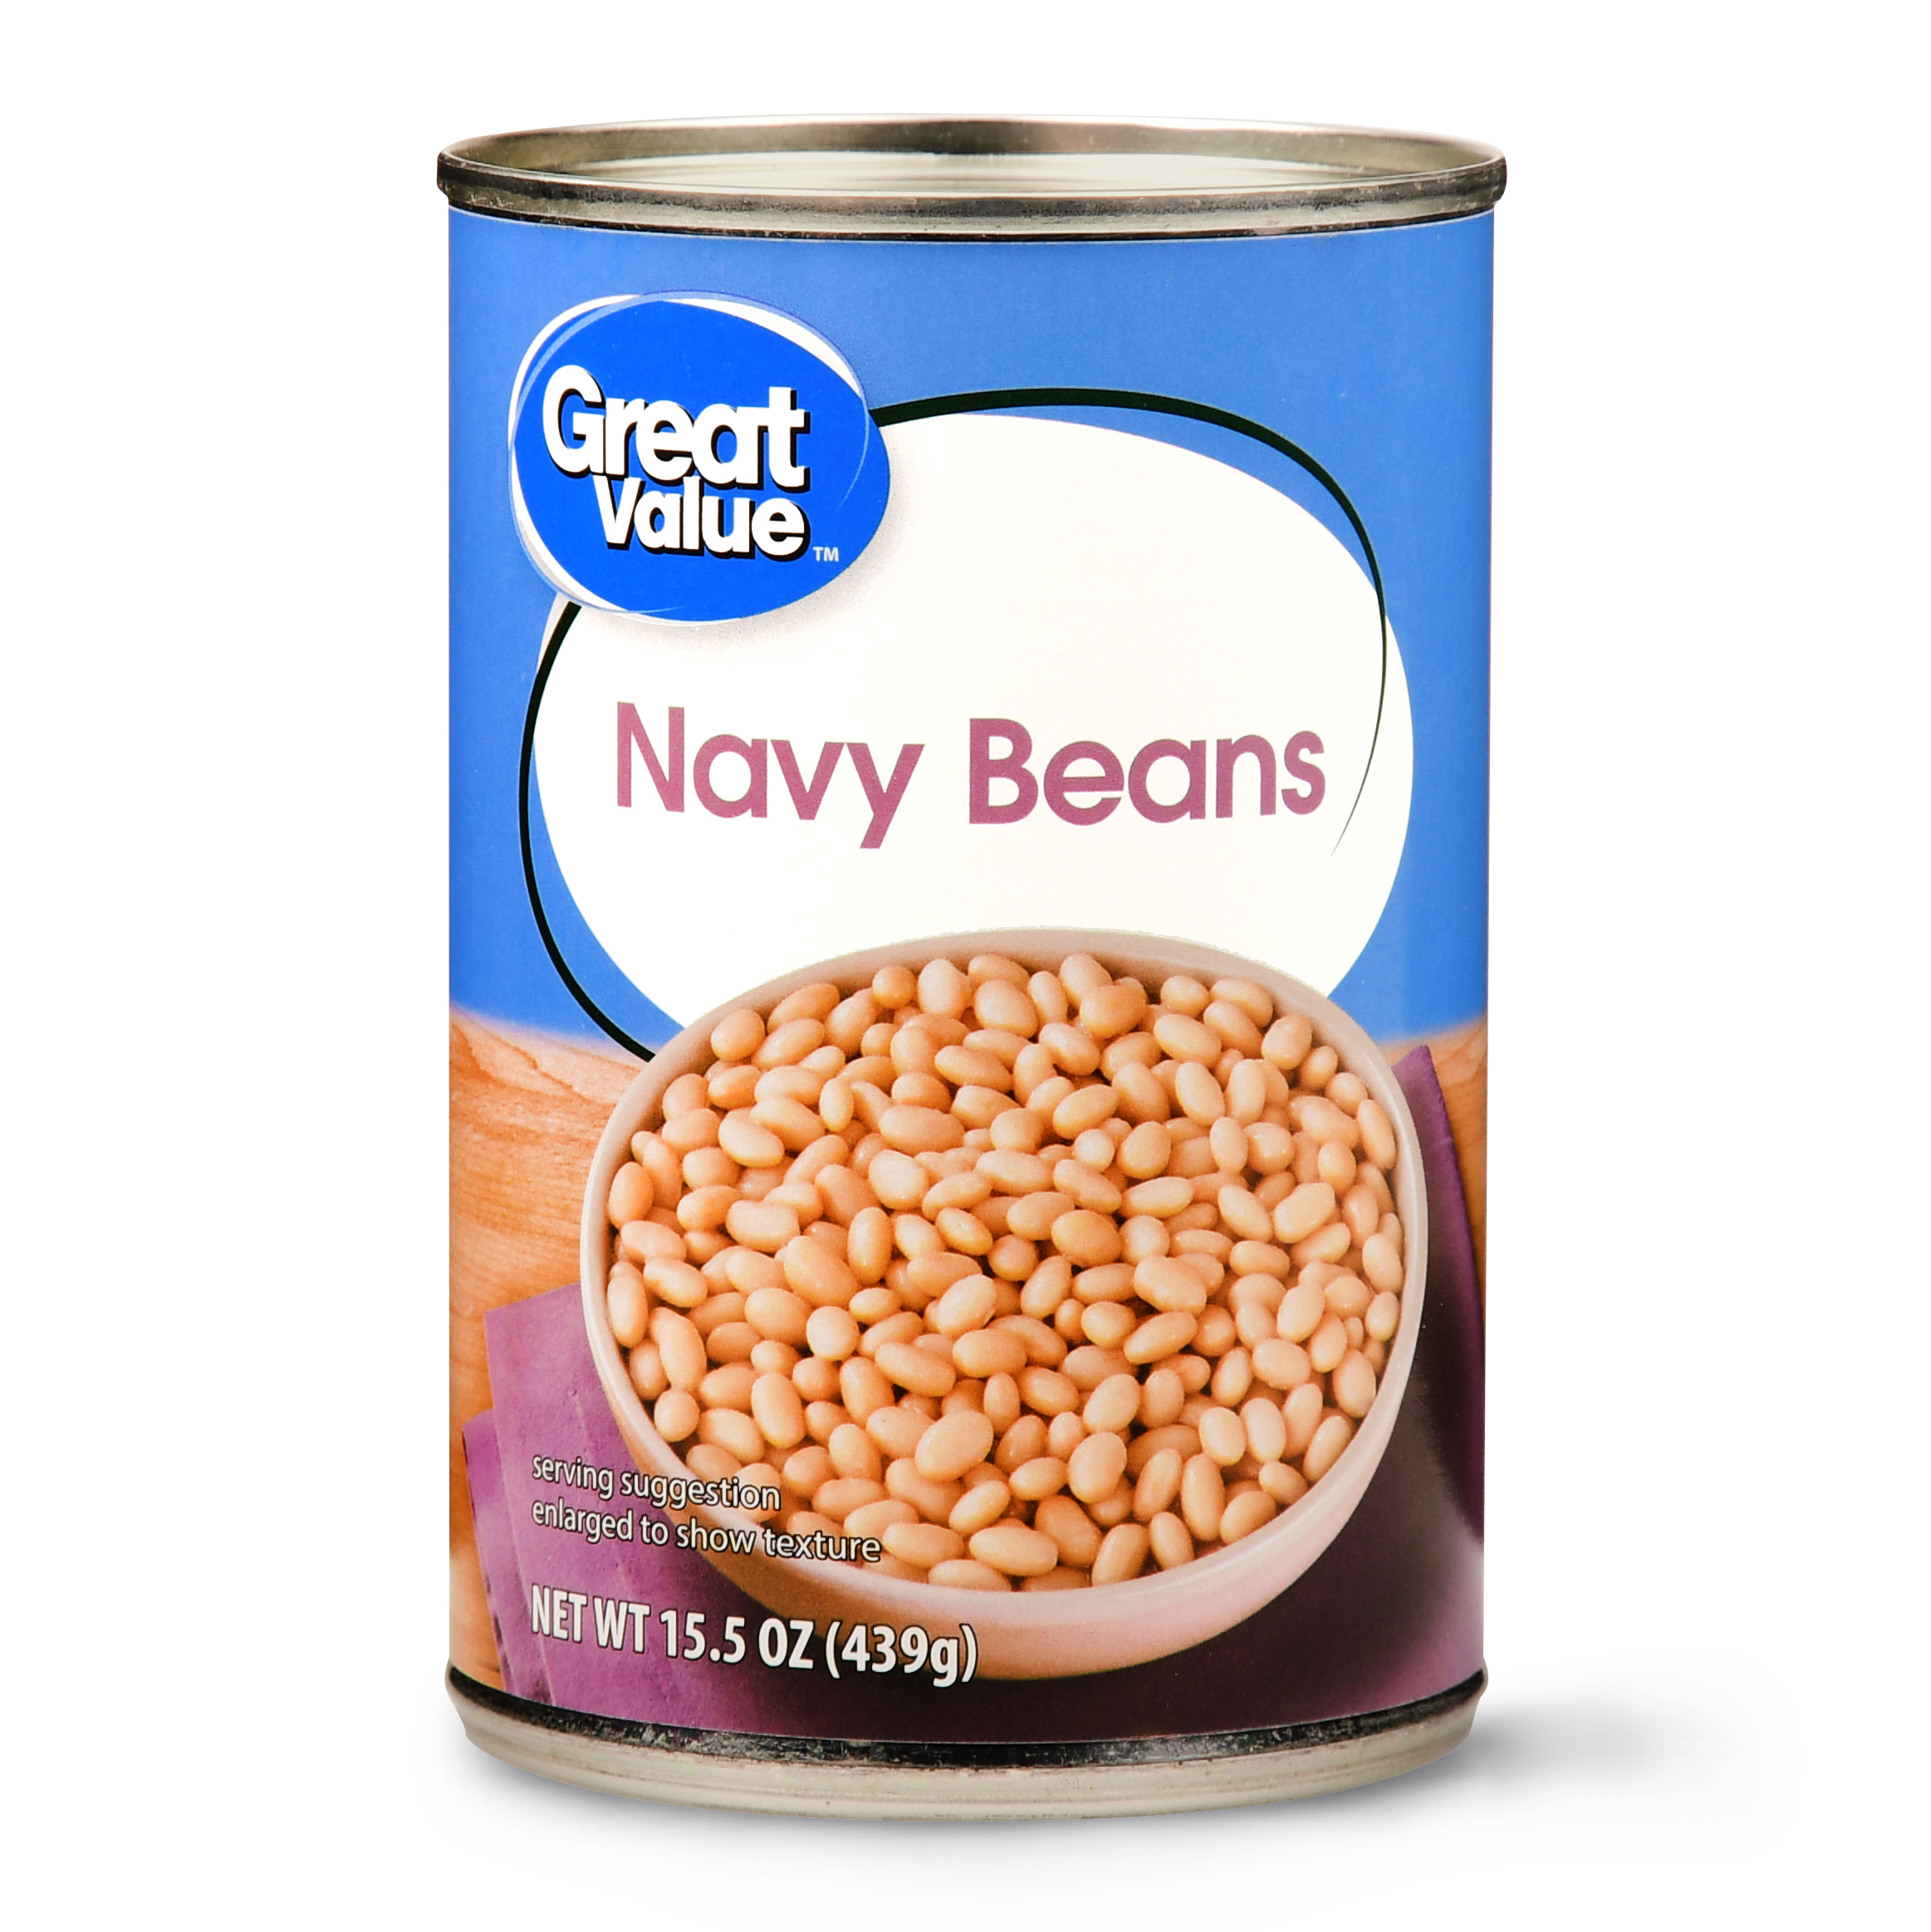 Great Value Navy Beans, 15.5 Oz